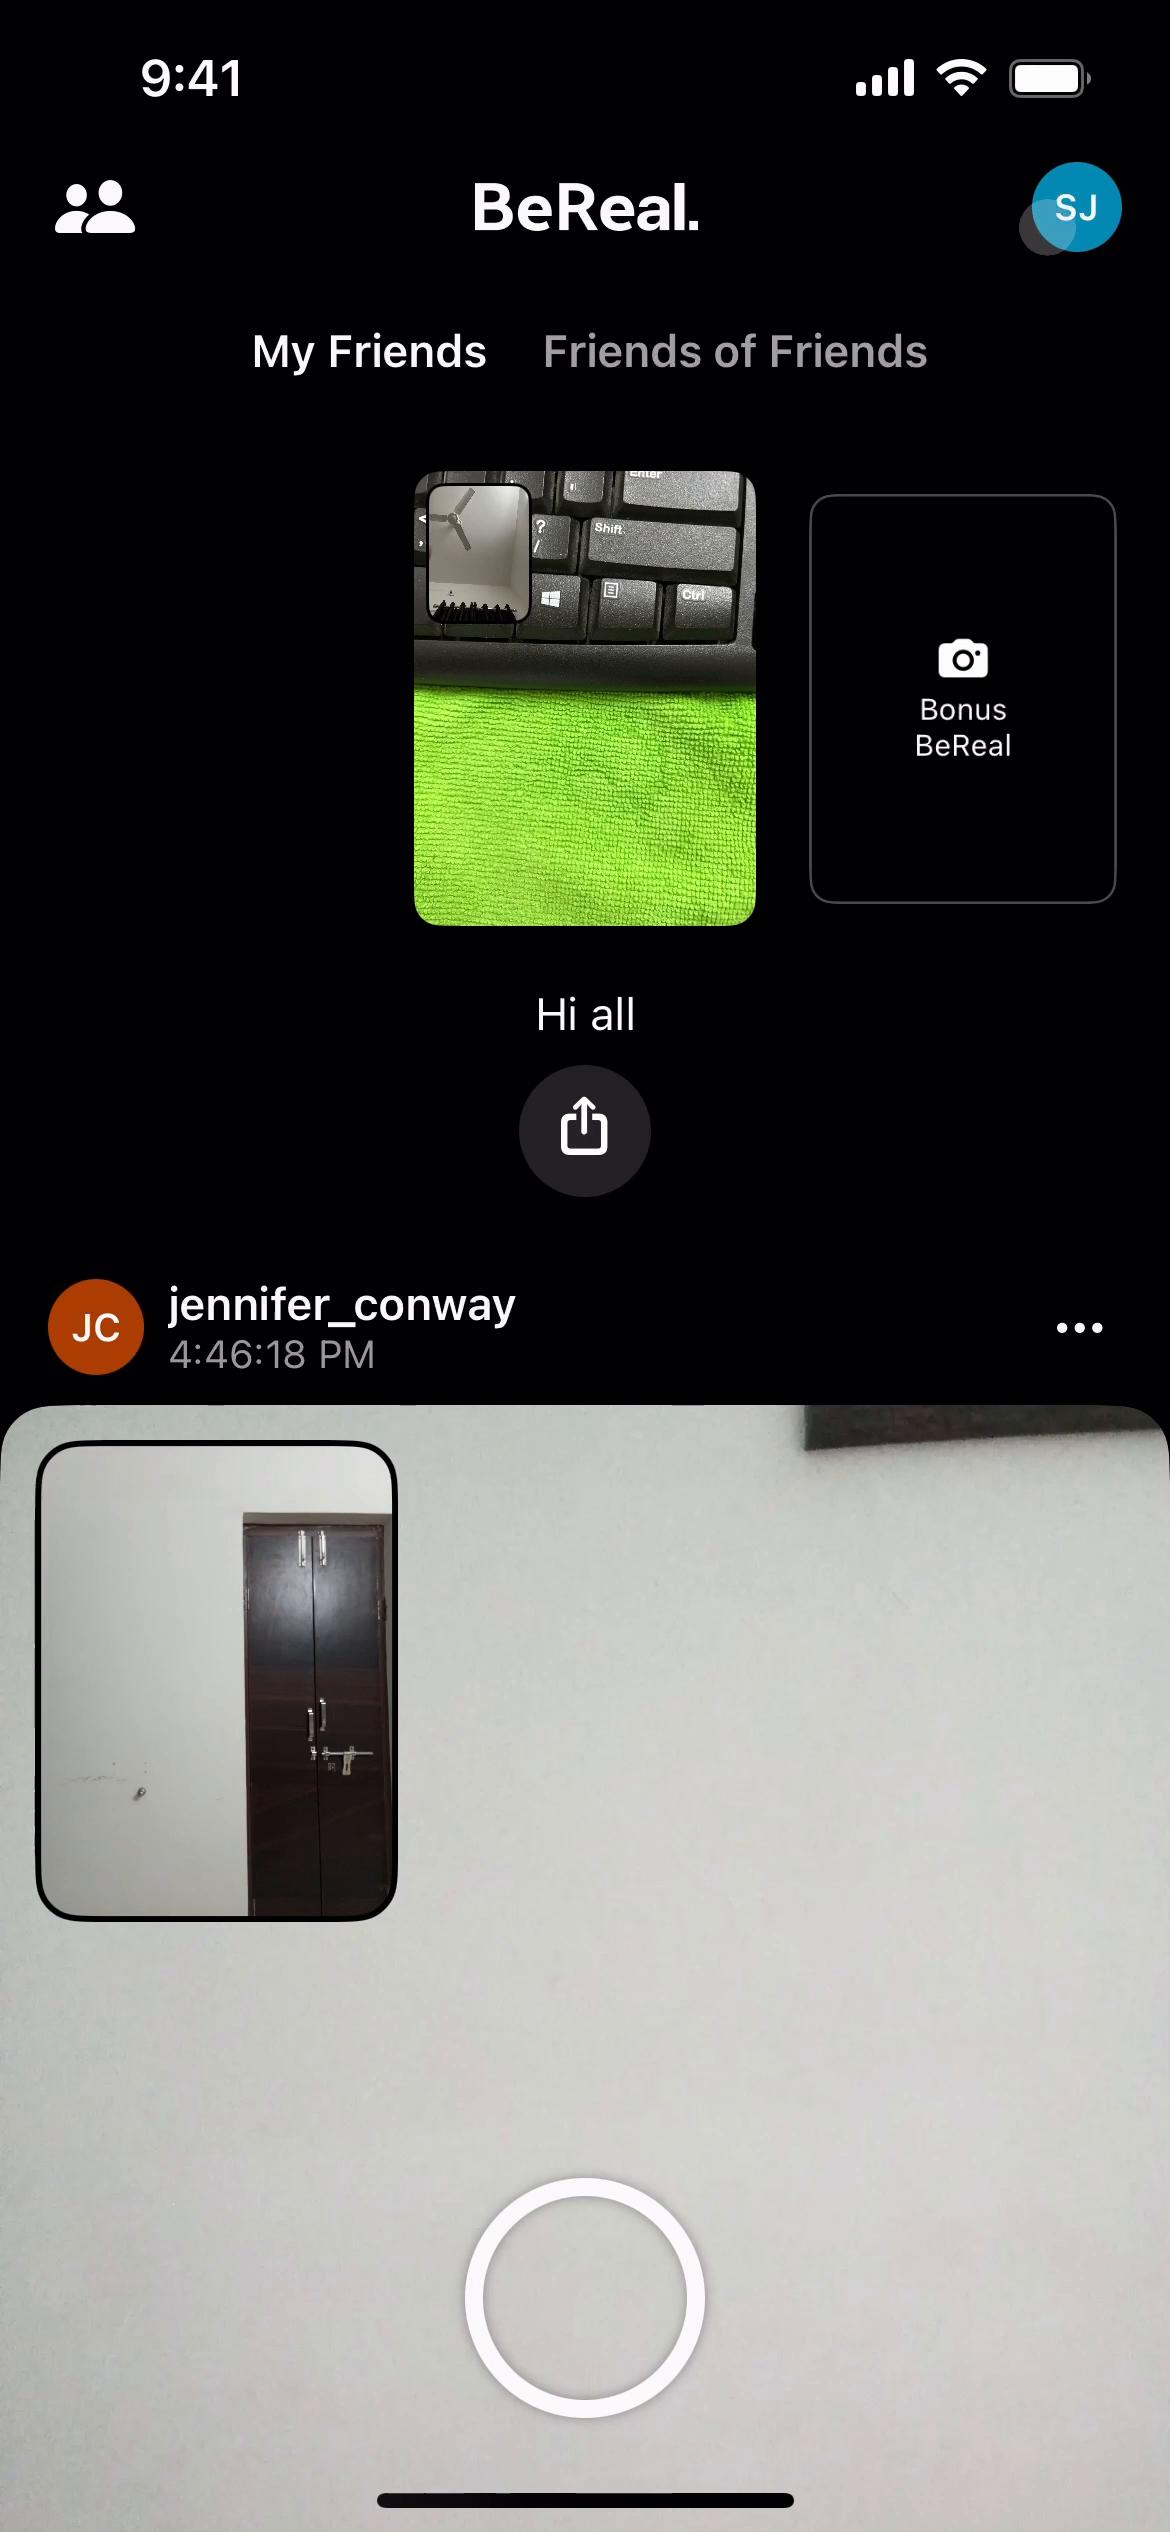 Updating your profile on BeReal. video screenshot